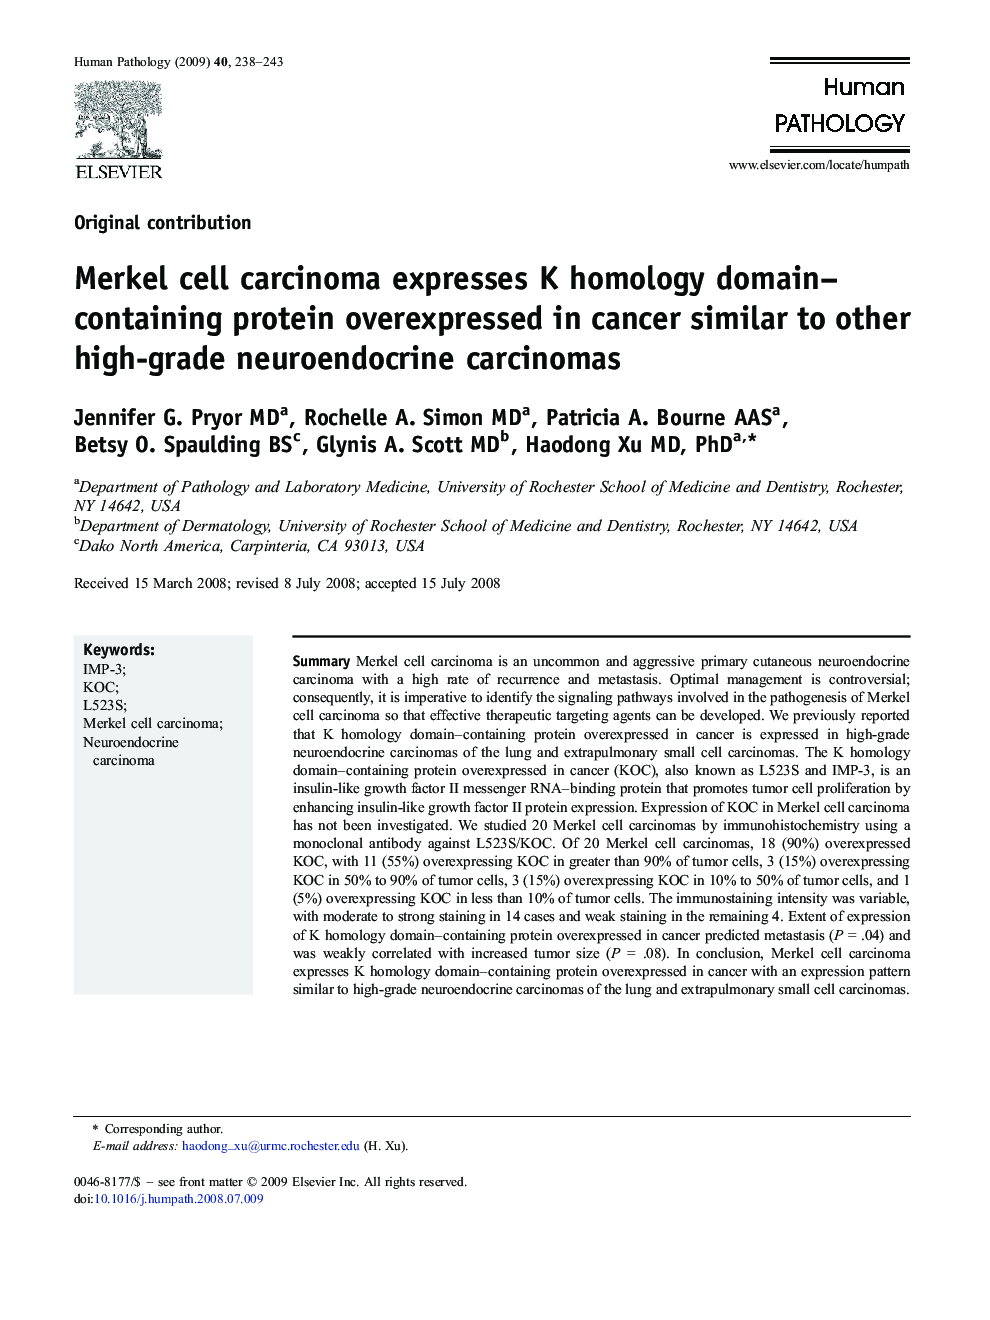 Merkel cell carcinoma expresses K homology domain–containing protein overexpressed in cancer similar to other high-grade neuroendocrine carcinomas